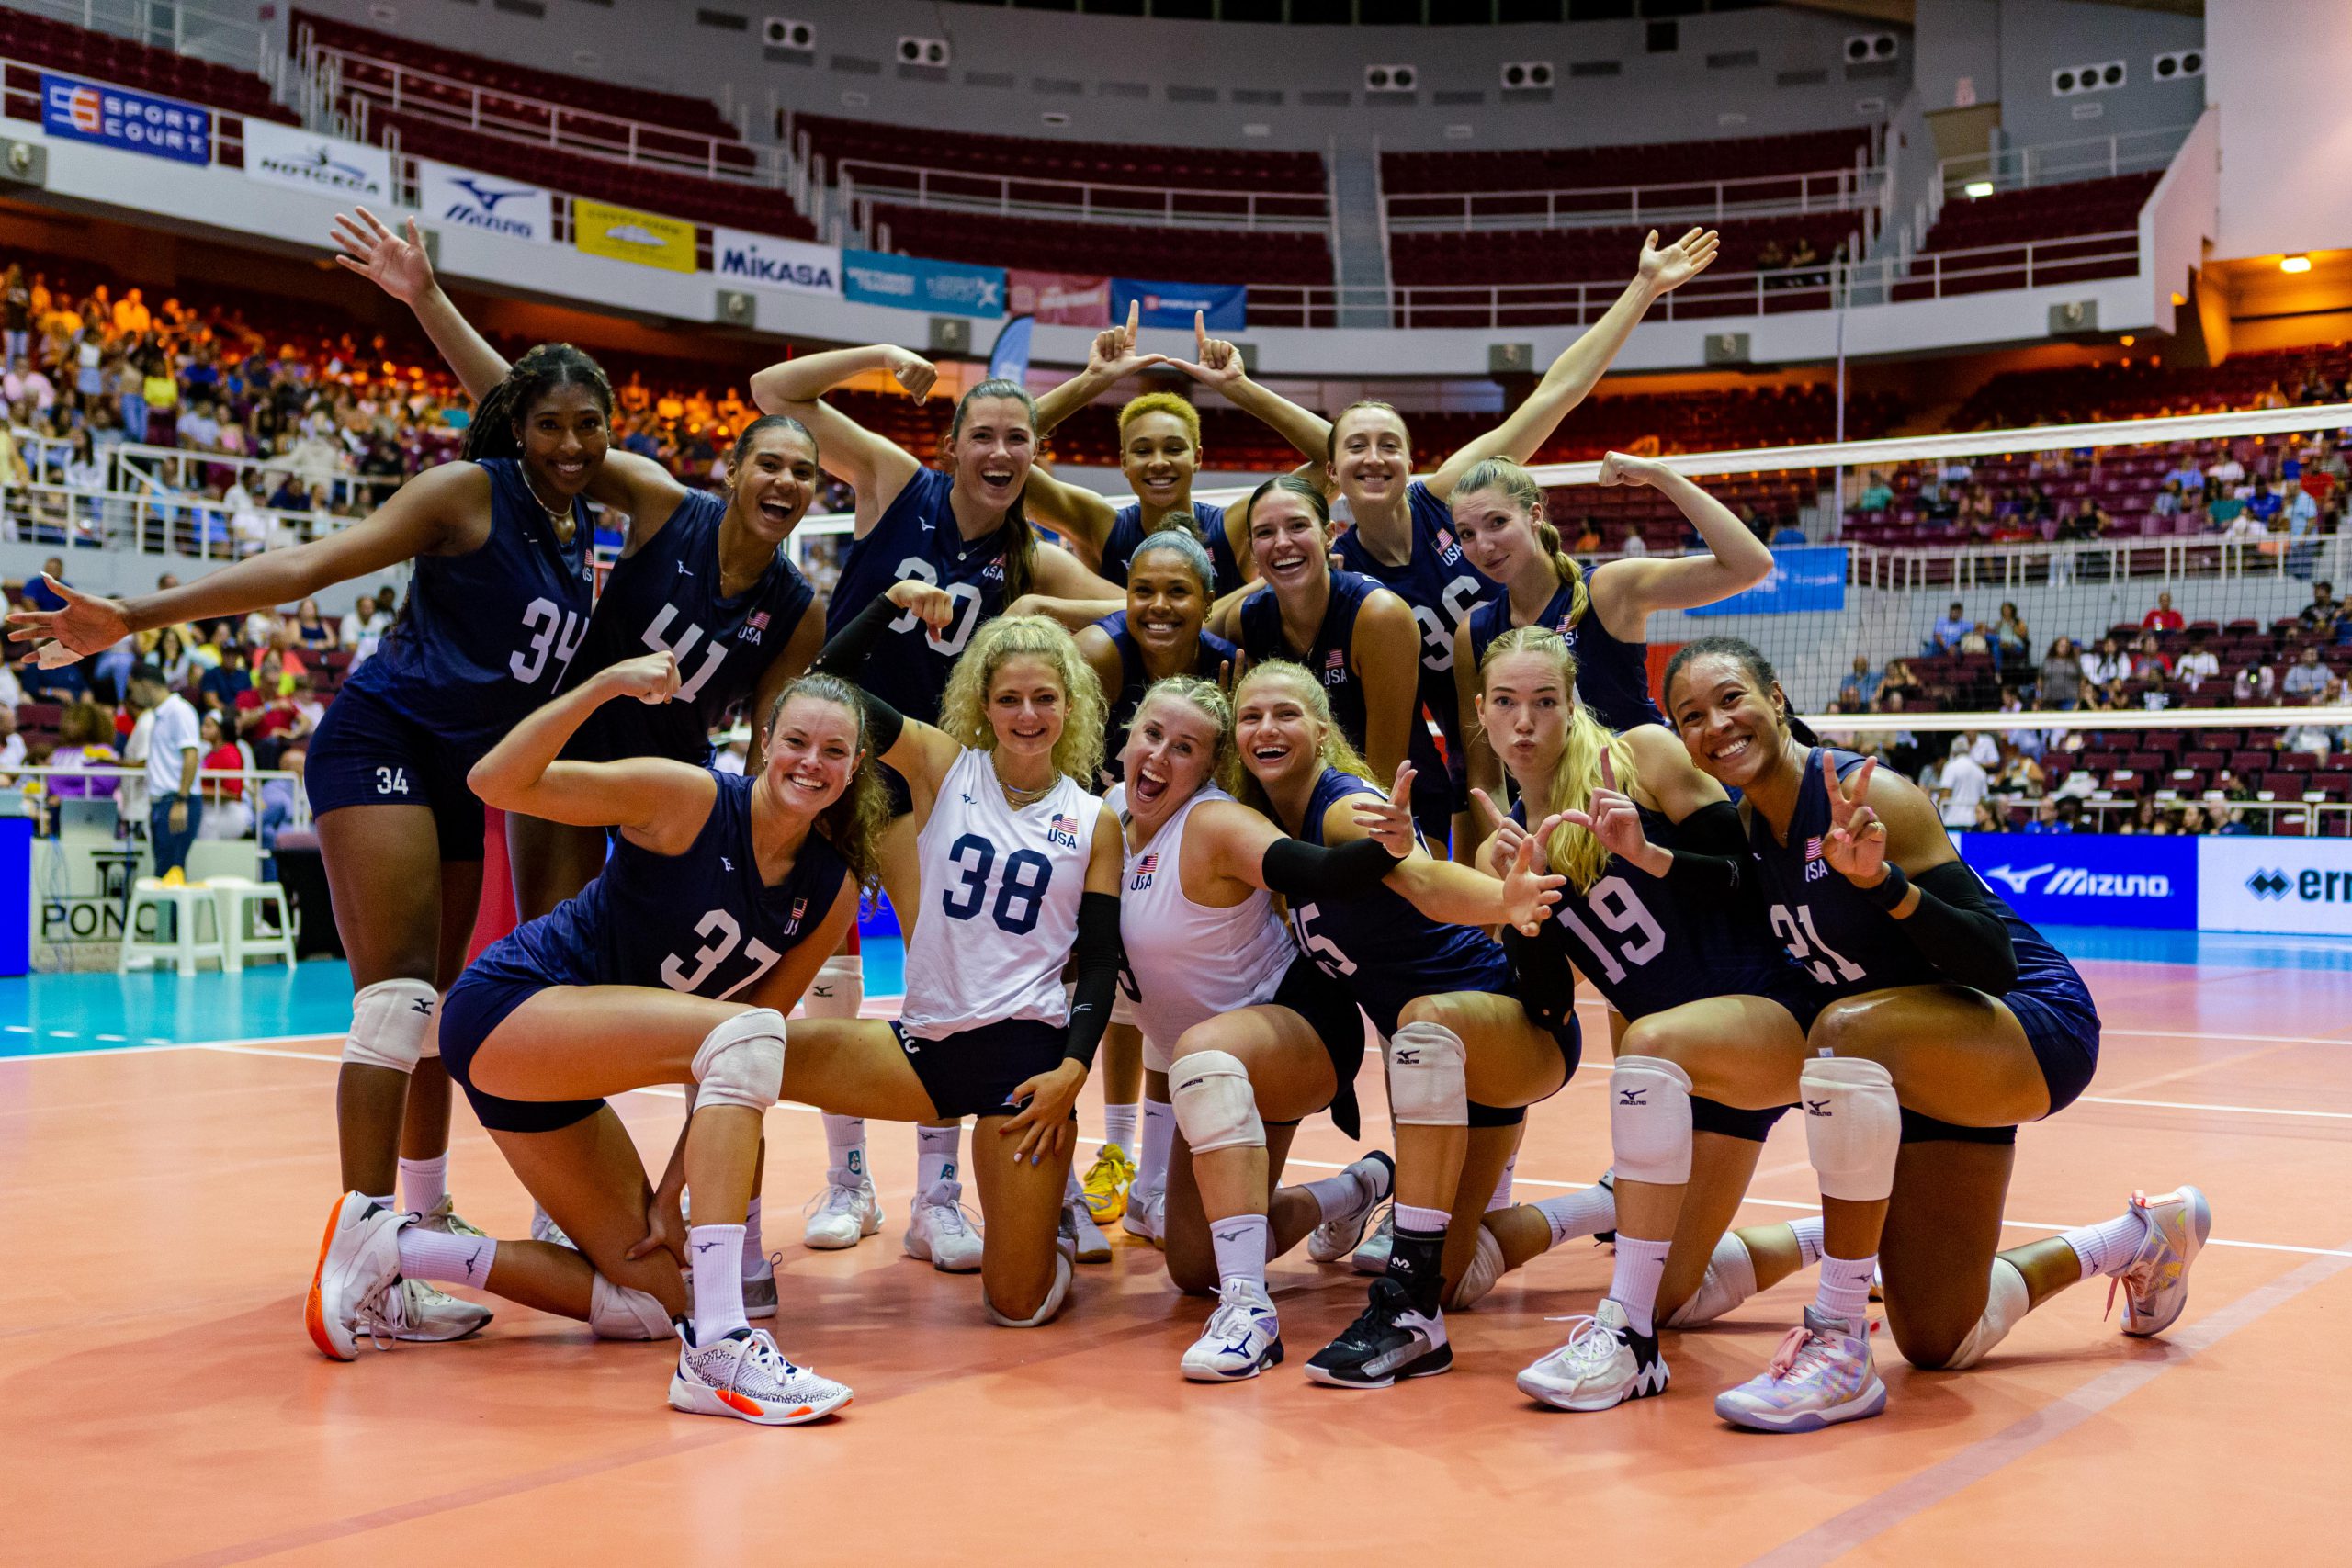 United States to semifinals undefeated